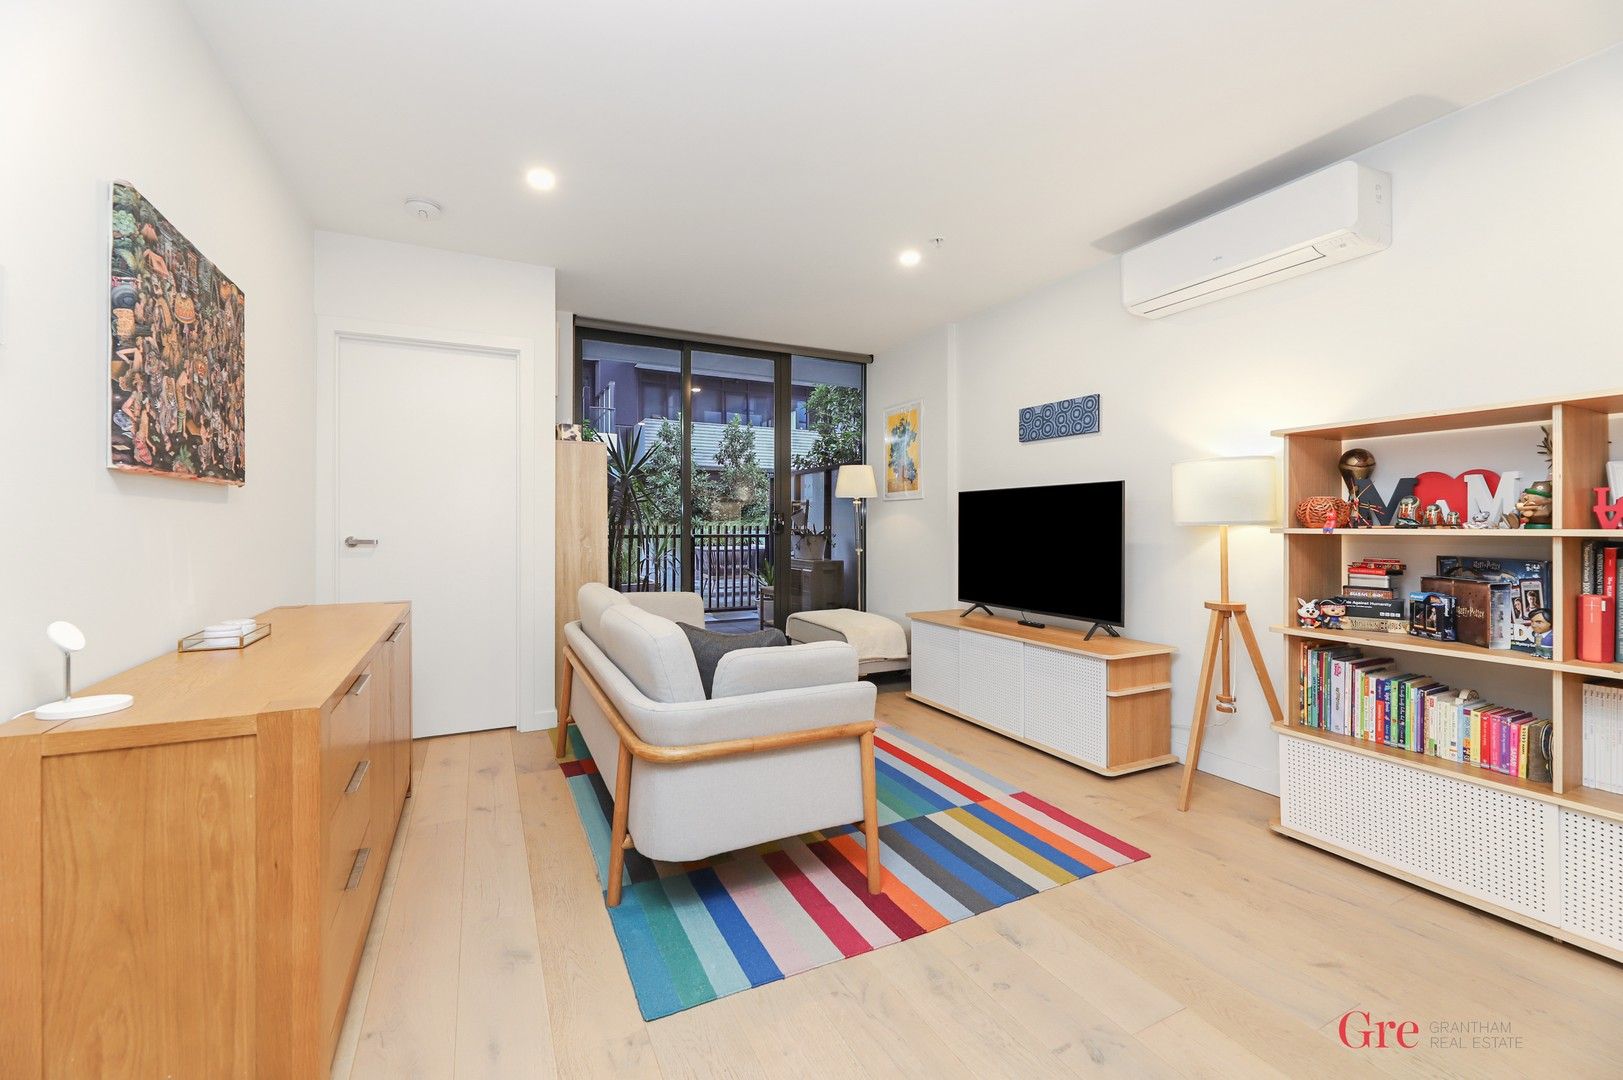 2 bedrooms Apartment / Unit / Flat in G4/1 Olive York Way BRUNSWICK WEST VIC, 3055